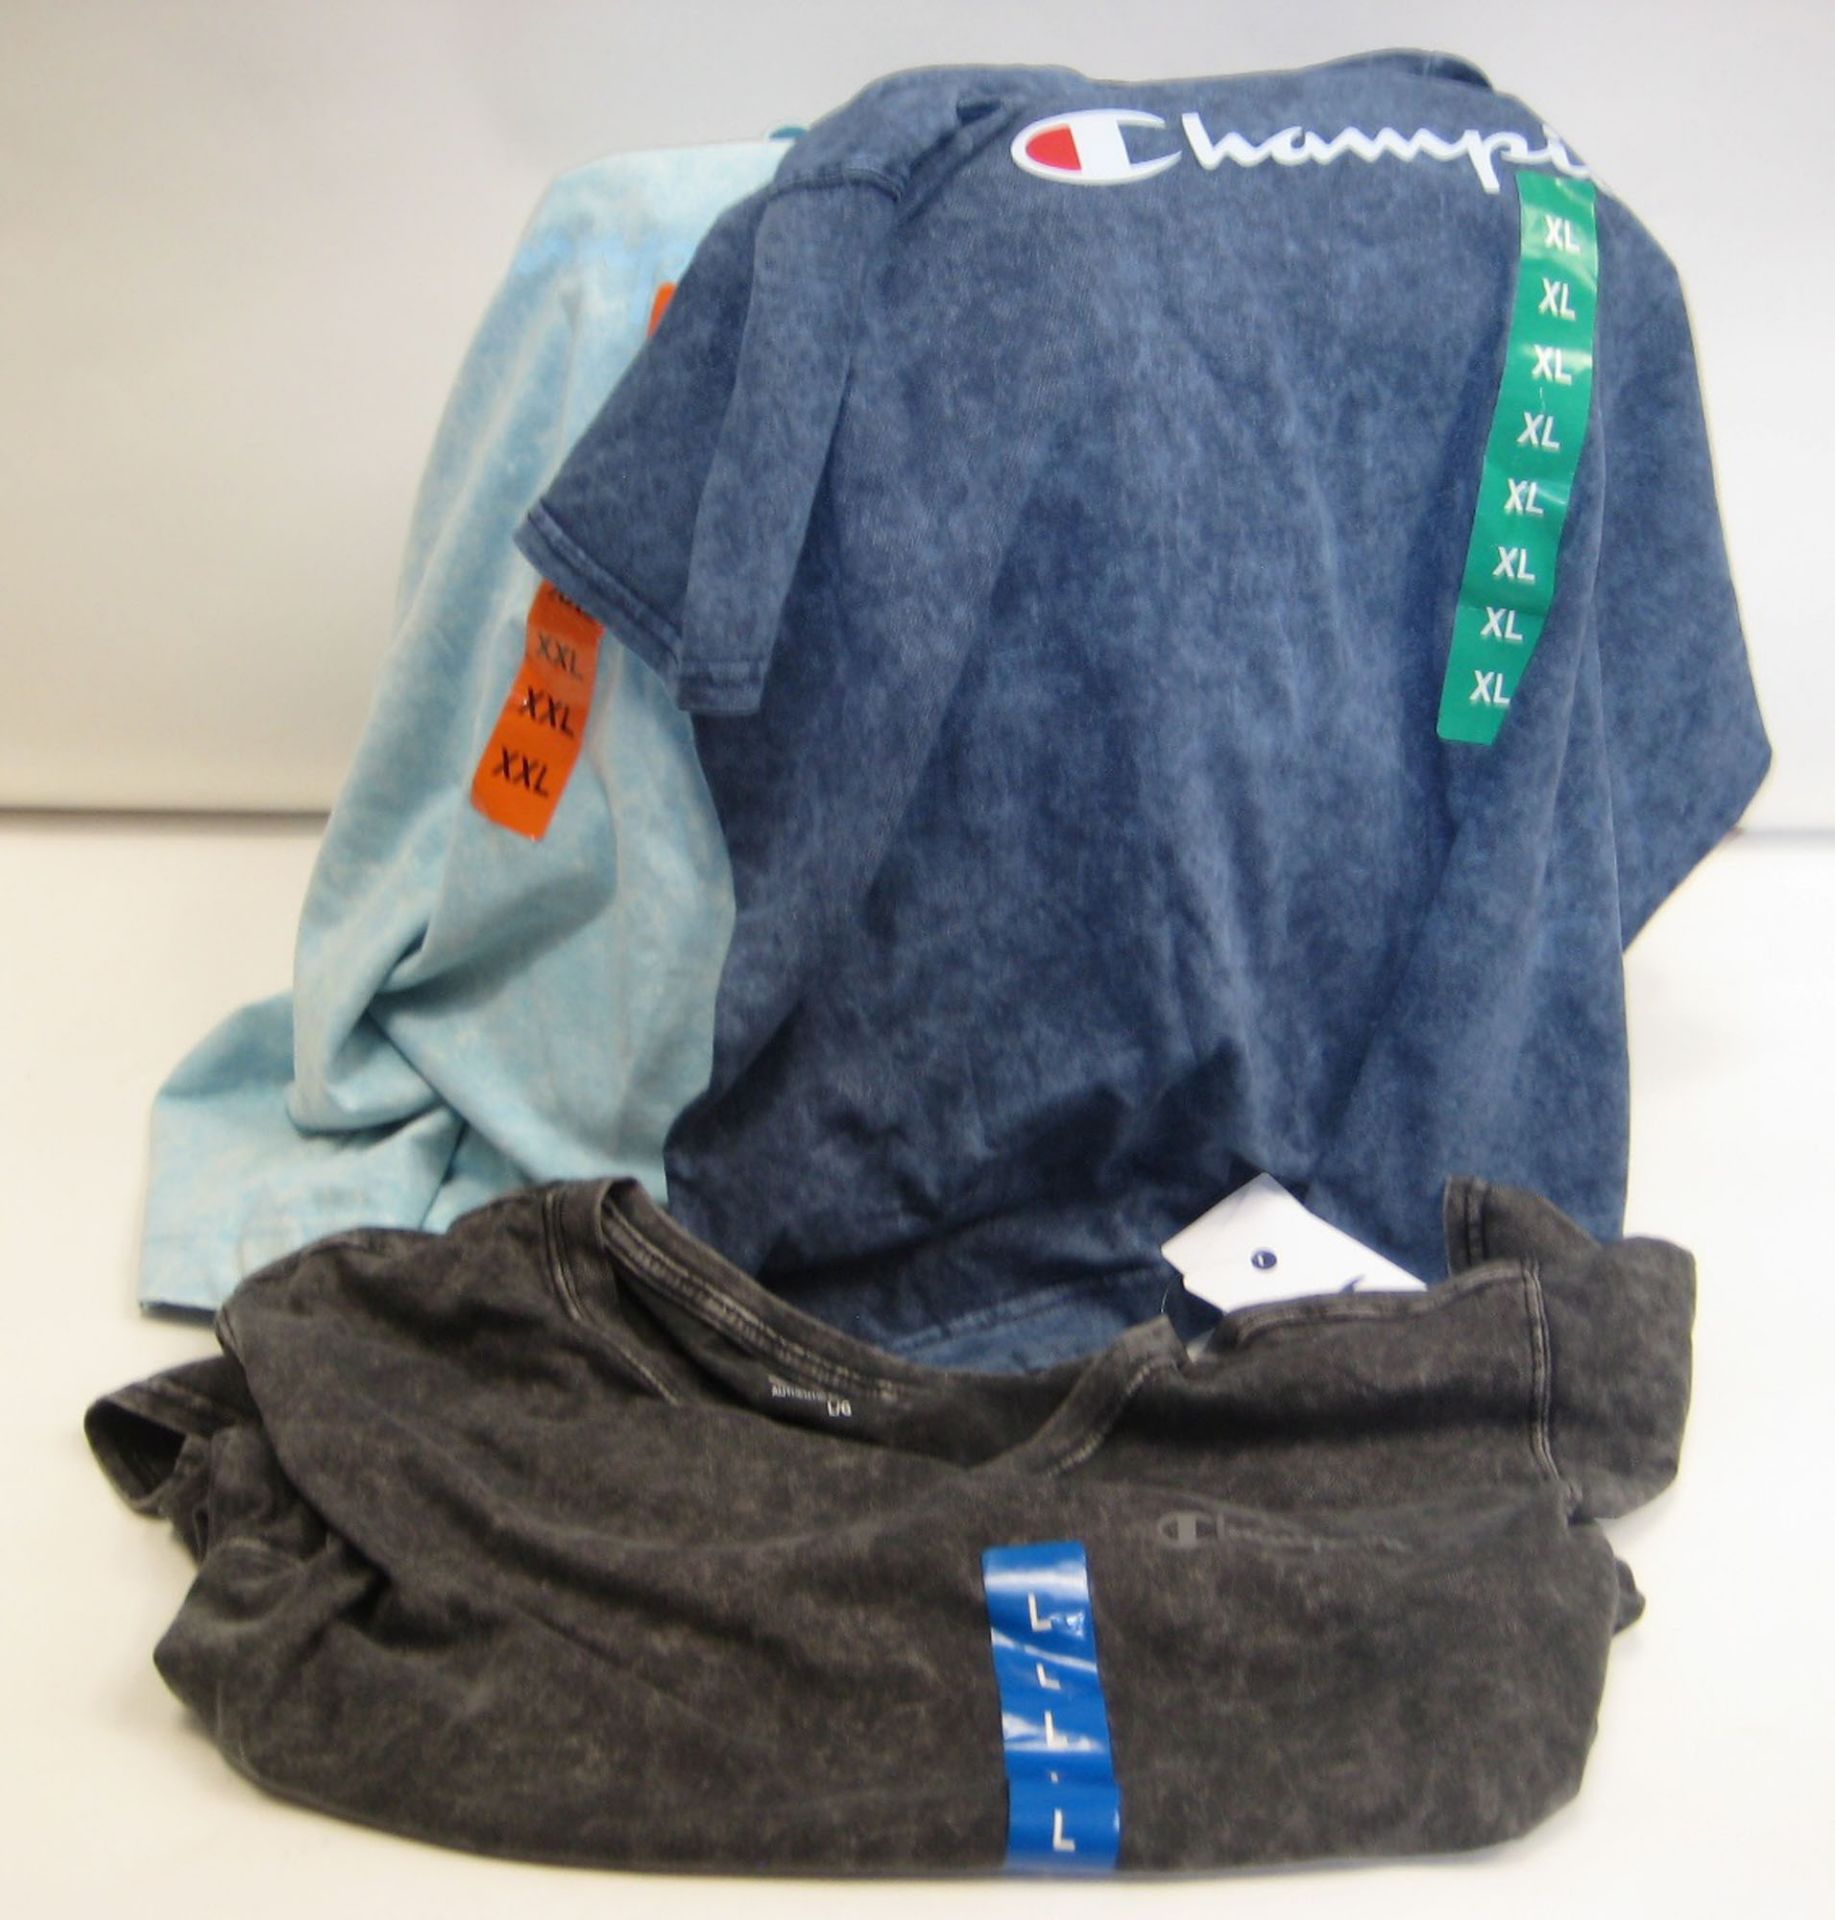 Bag containing approx 30 t shirts by Champion in light blue, dark blue and grey sizes L - XXL